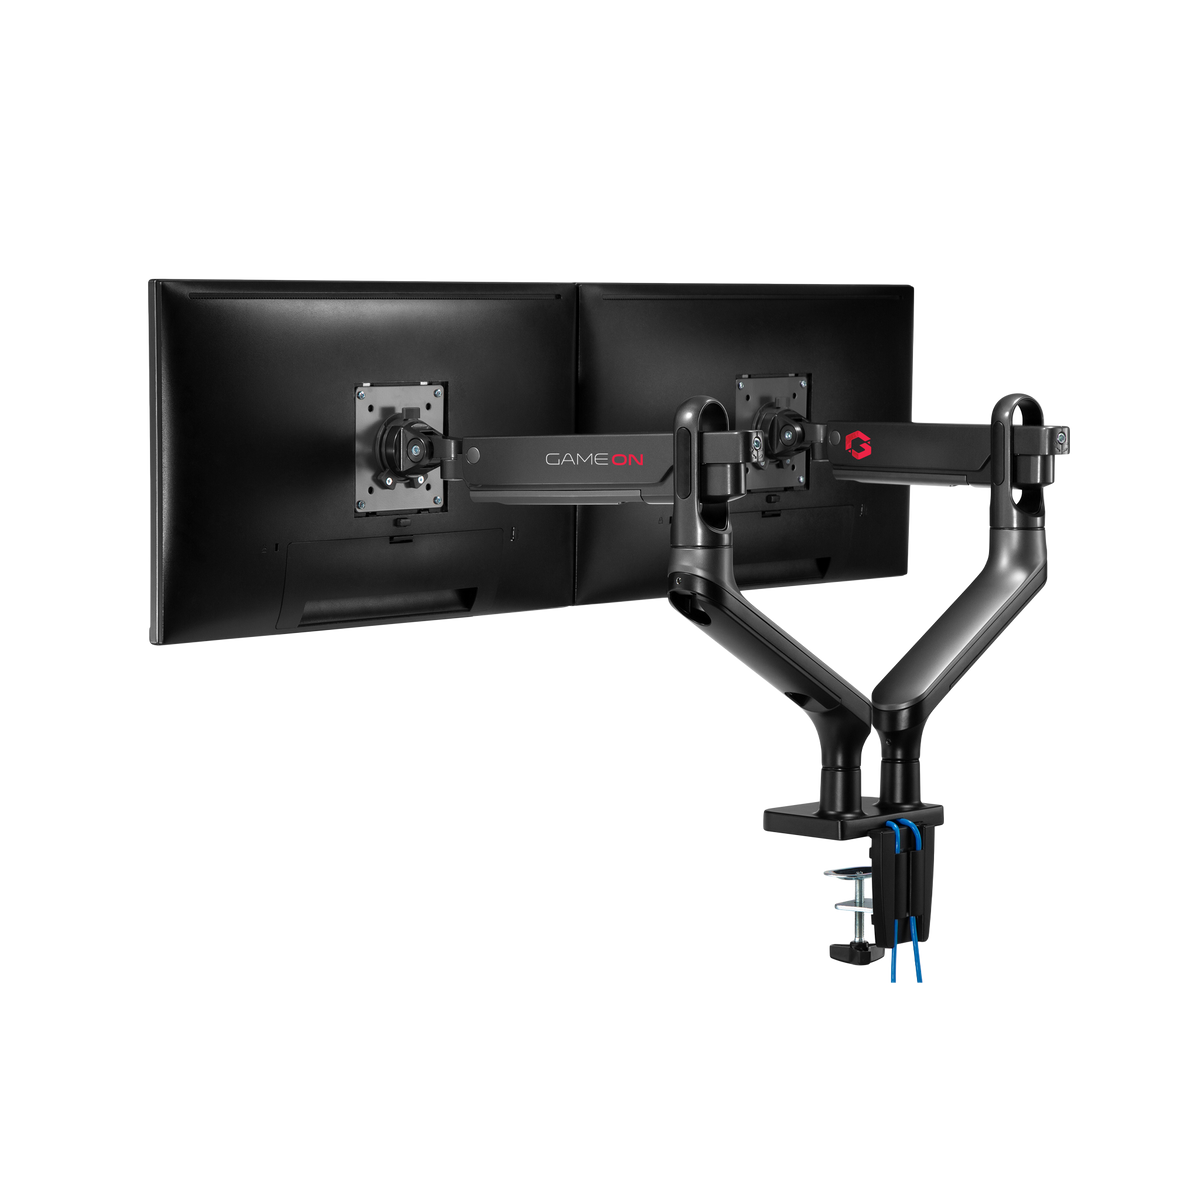 GAMEON GO-2144 Premium Aluminum Spring-Assisted Dual Monitor Arm For Gaming And Office Use, 17" - 33" With USB Port, Each Arm Up To 9 KG, Space Grey